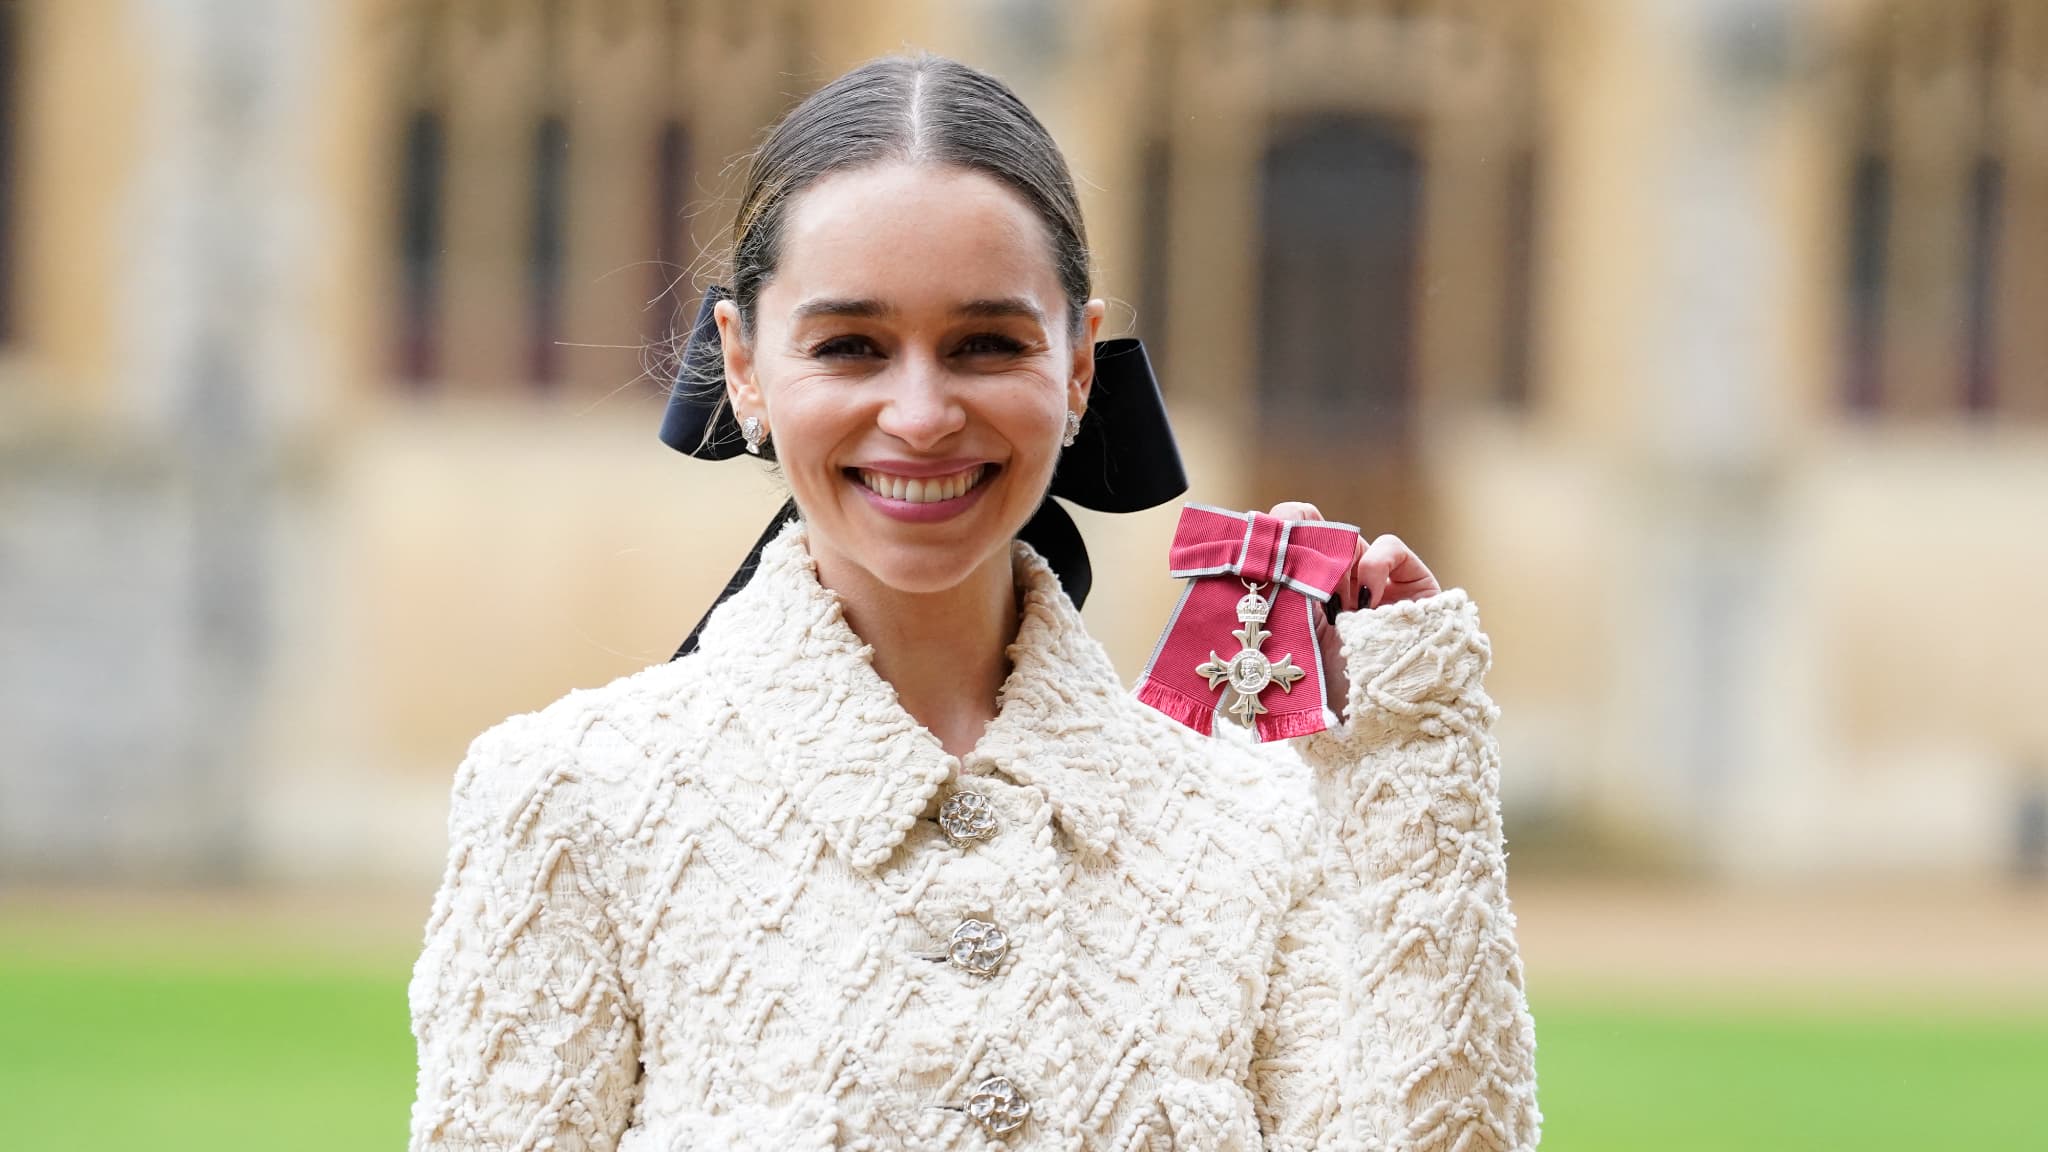 Dressed in Chanel, actress Emilia Clarke was honored by Prince William at Windsor Castle